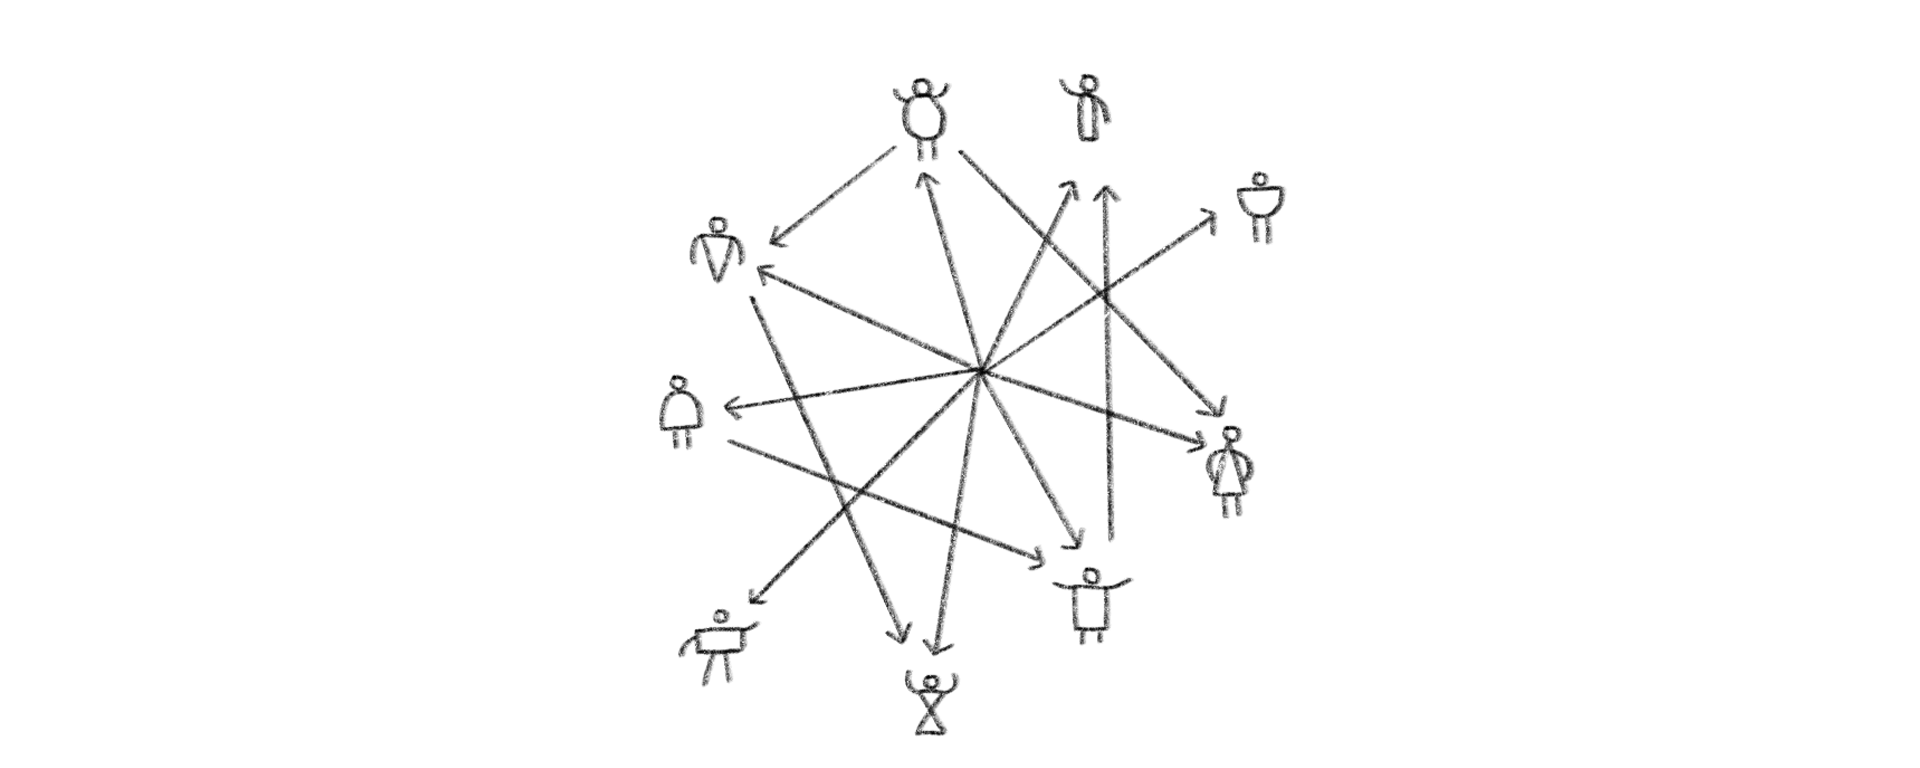 An illustration showing a network of people, all different shapes and all connected to each other.